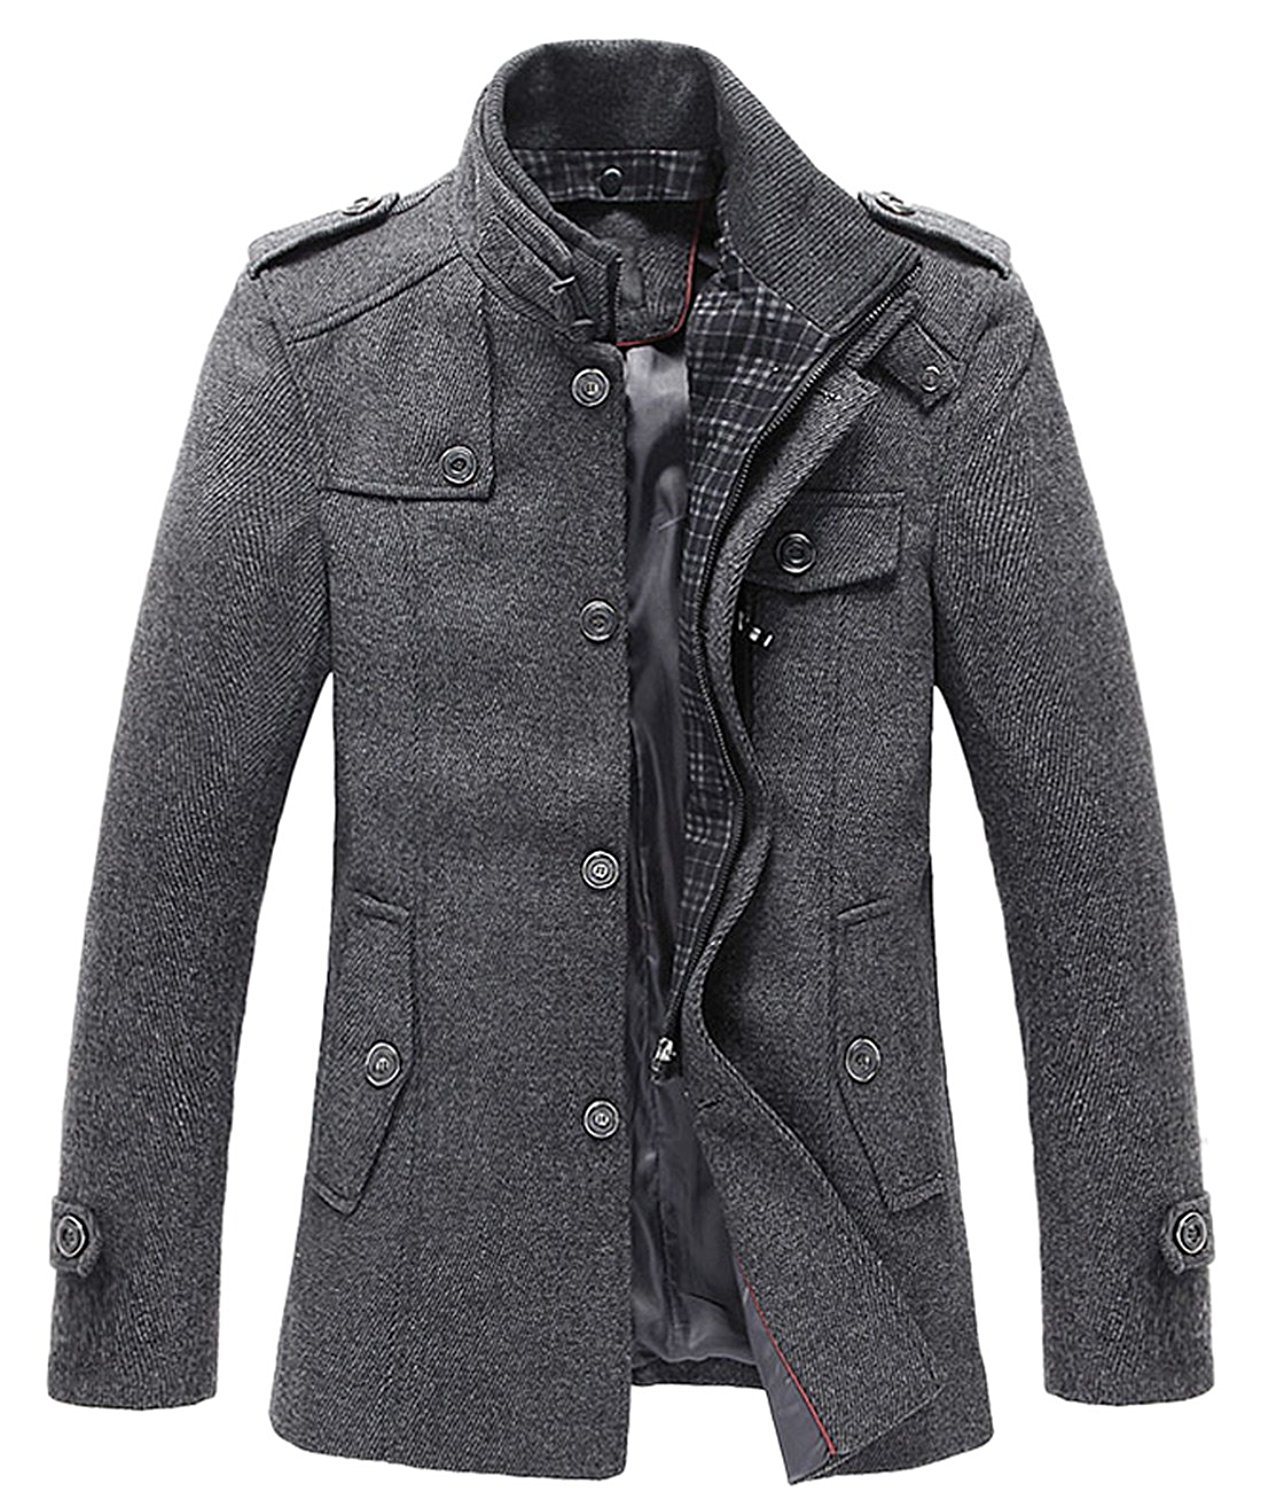 Xiaolv88 Men's Winter Stylish Wool Blend Single Breasted Military